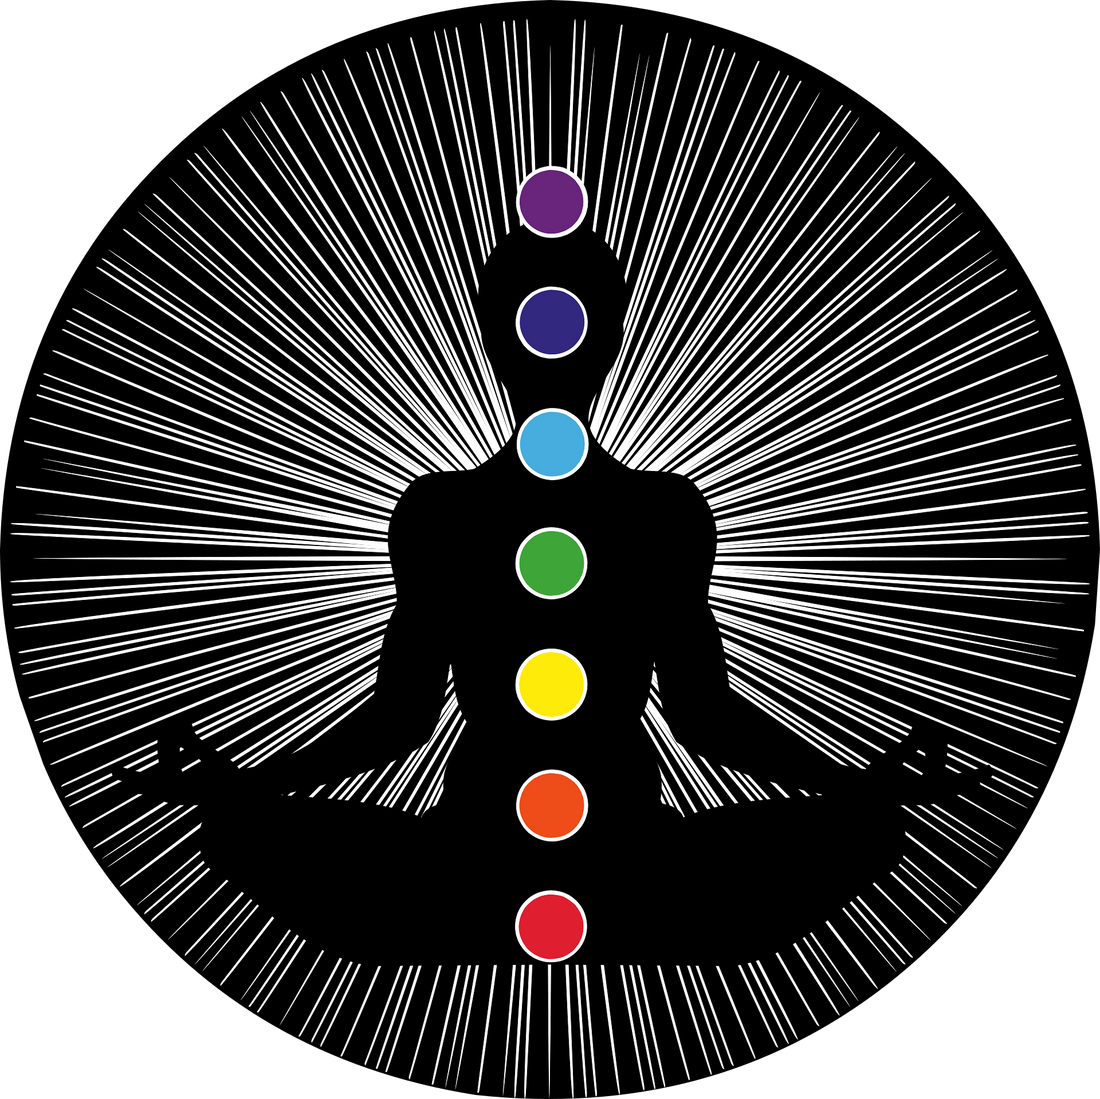 Seven Chakra Wheels illustrated on body in colors related to specific chakras.